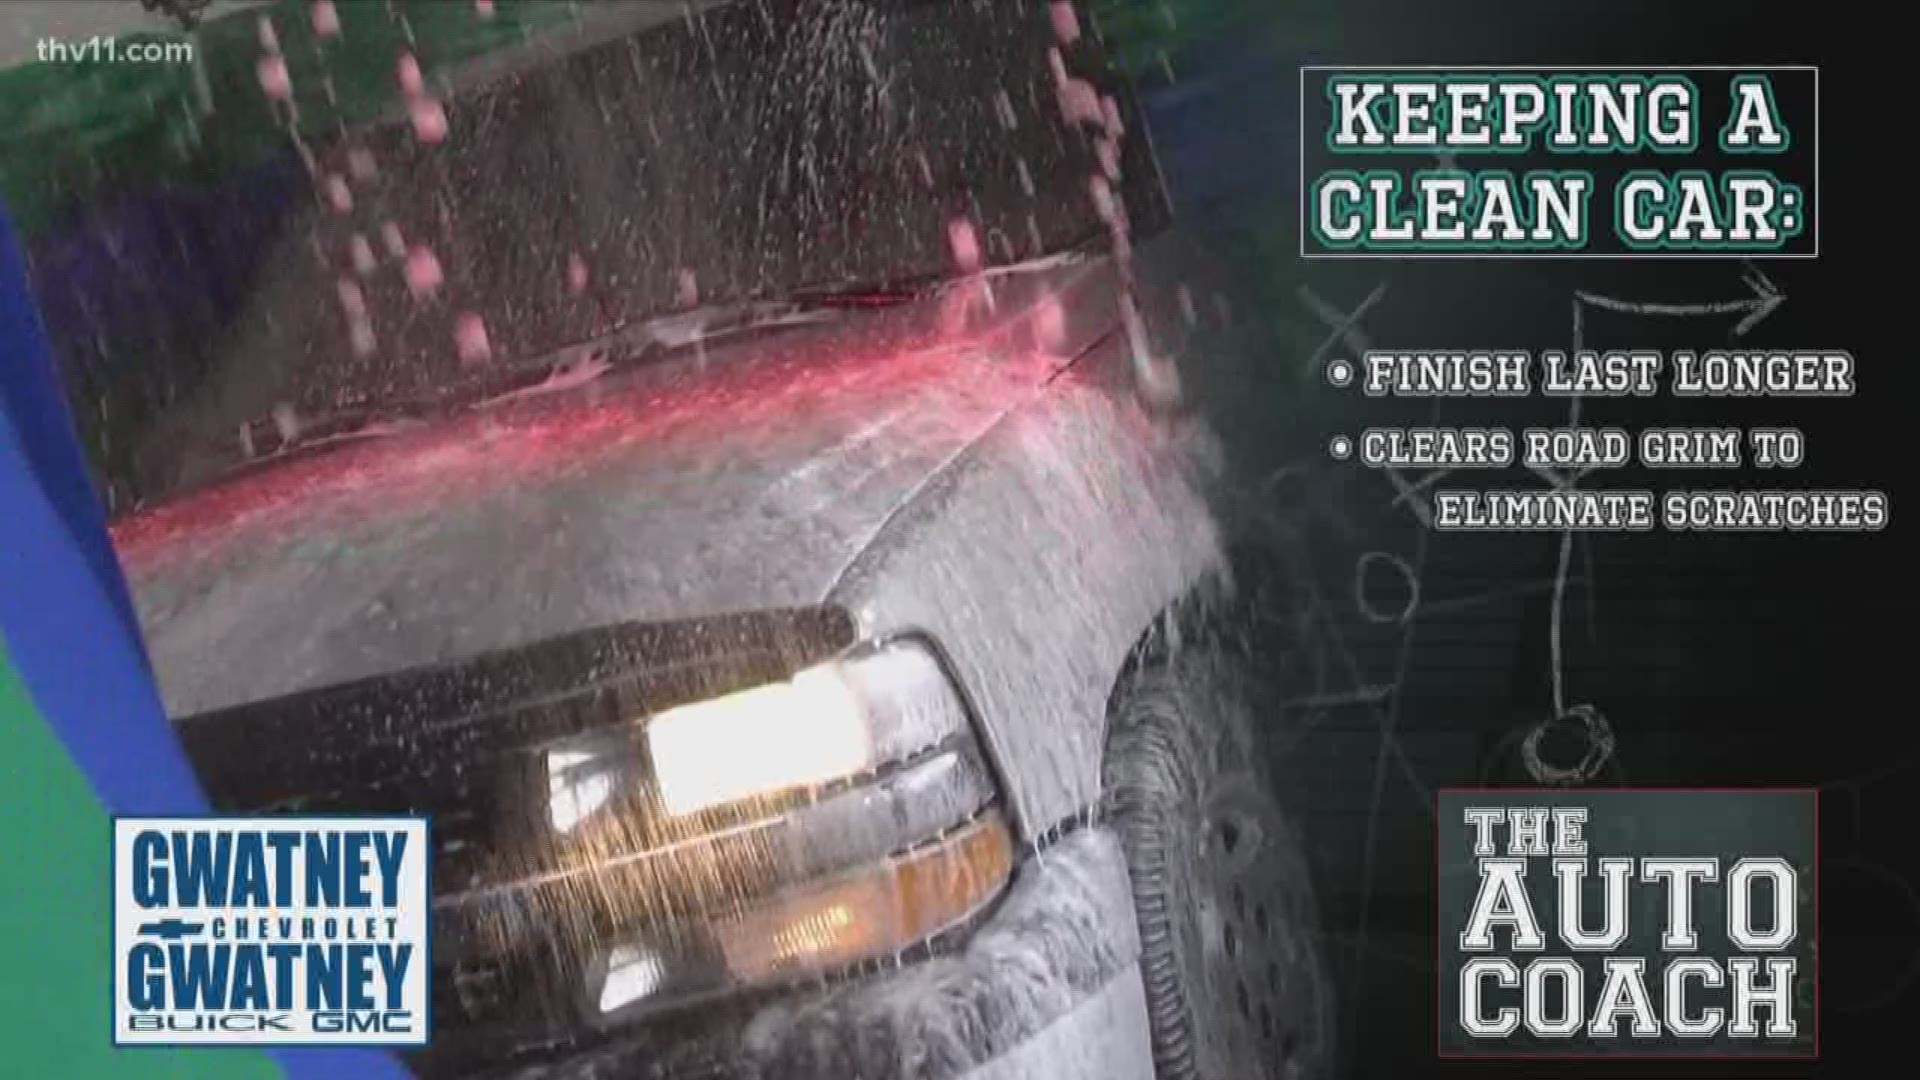 Jamie Cobb with Auto Coach tells us how to keep your car clean during the winter